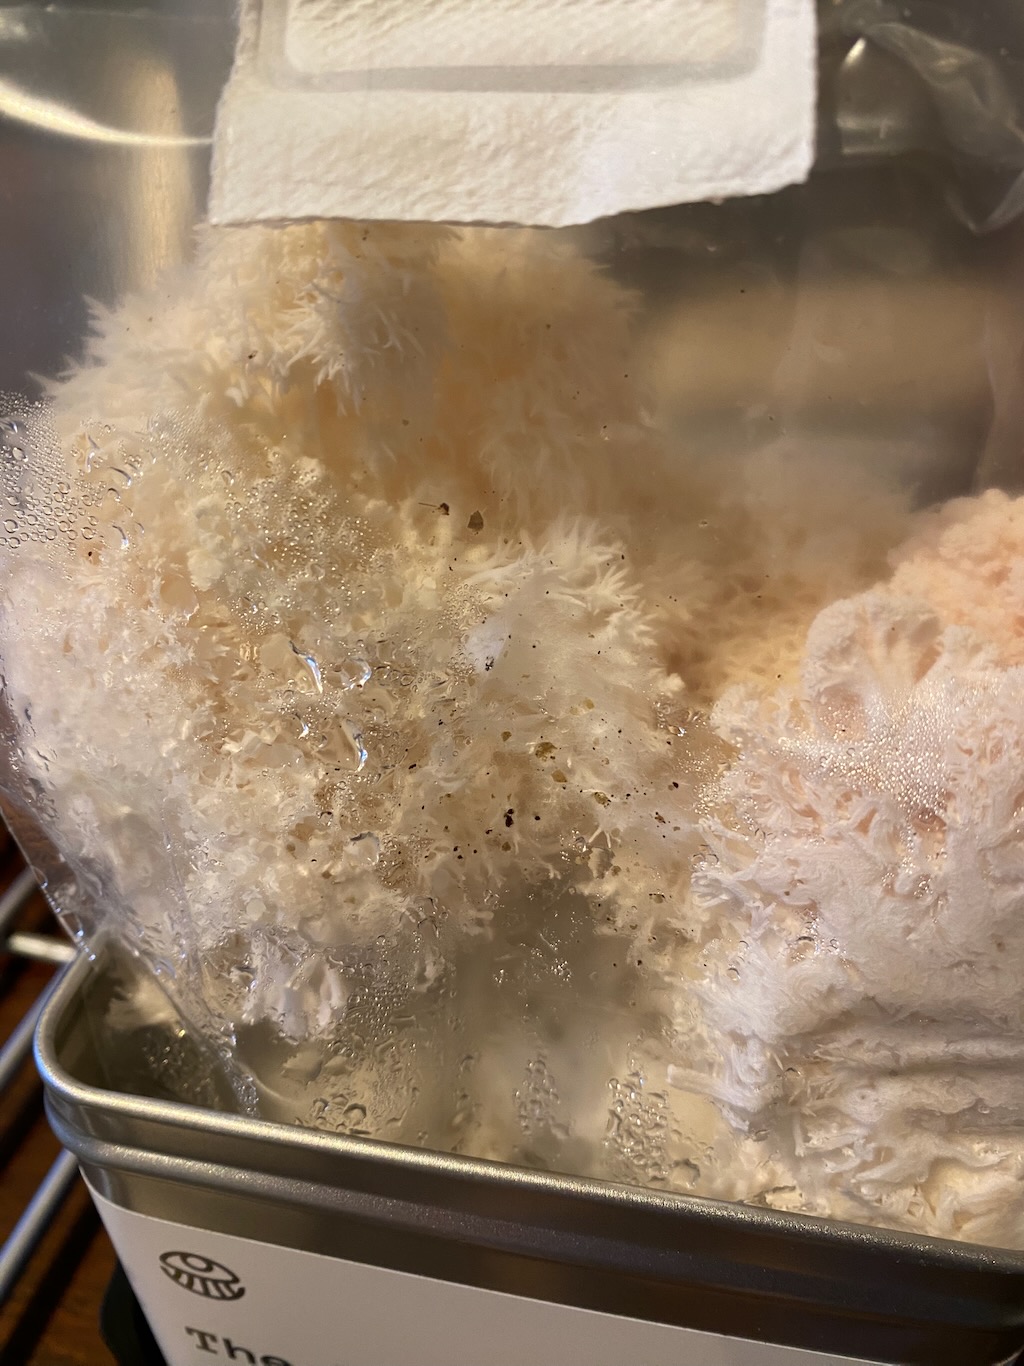 The lion's mane growing in their bag